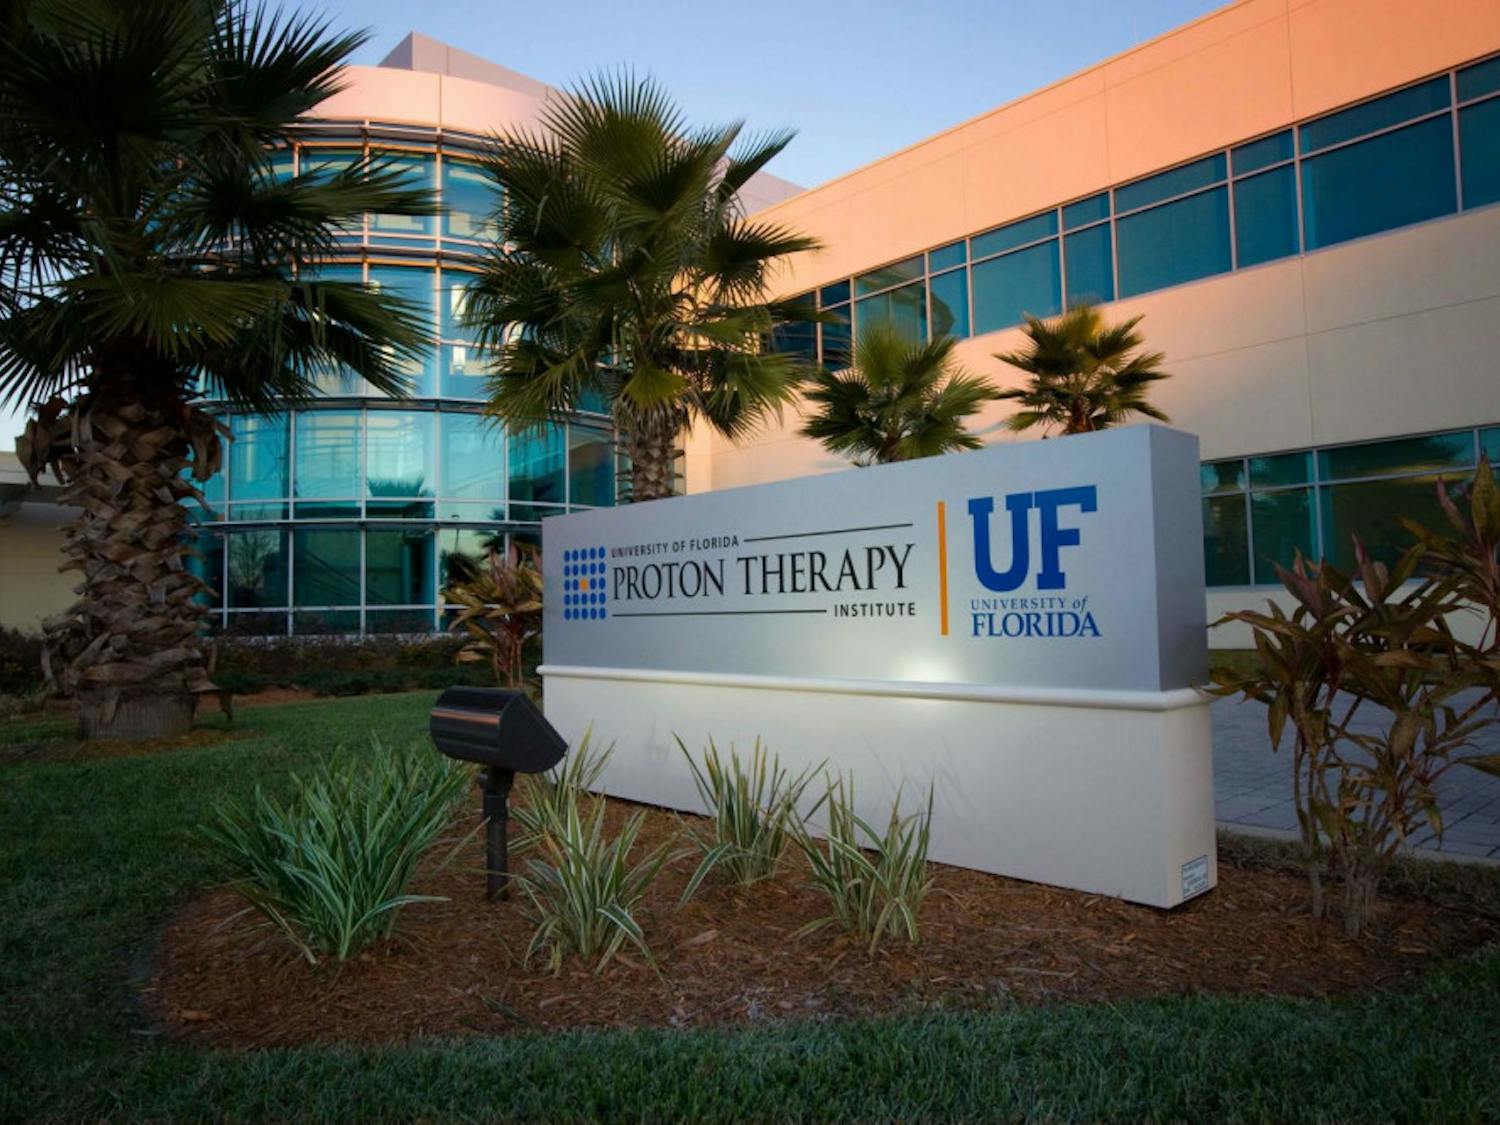 The UF Proton Therapy Institute in Jacksonville, Florida, received $11.5 million in research funds for its experimental prostate cancer treatment.&nbsp;